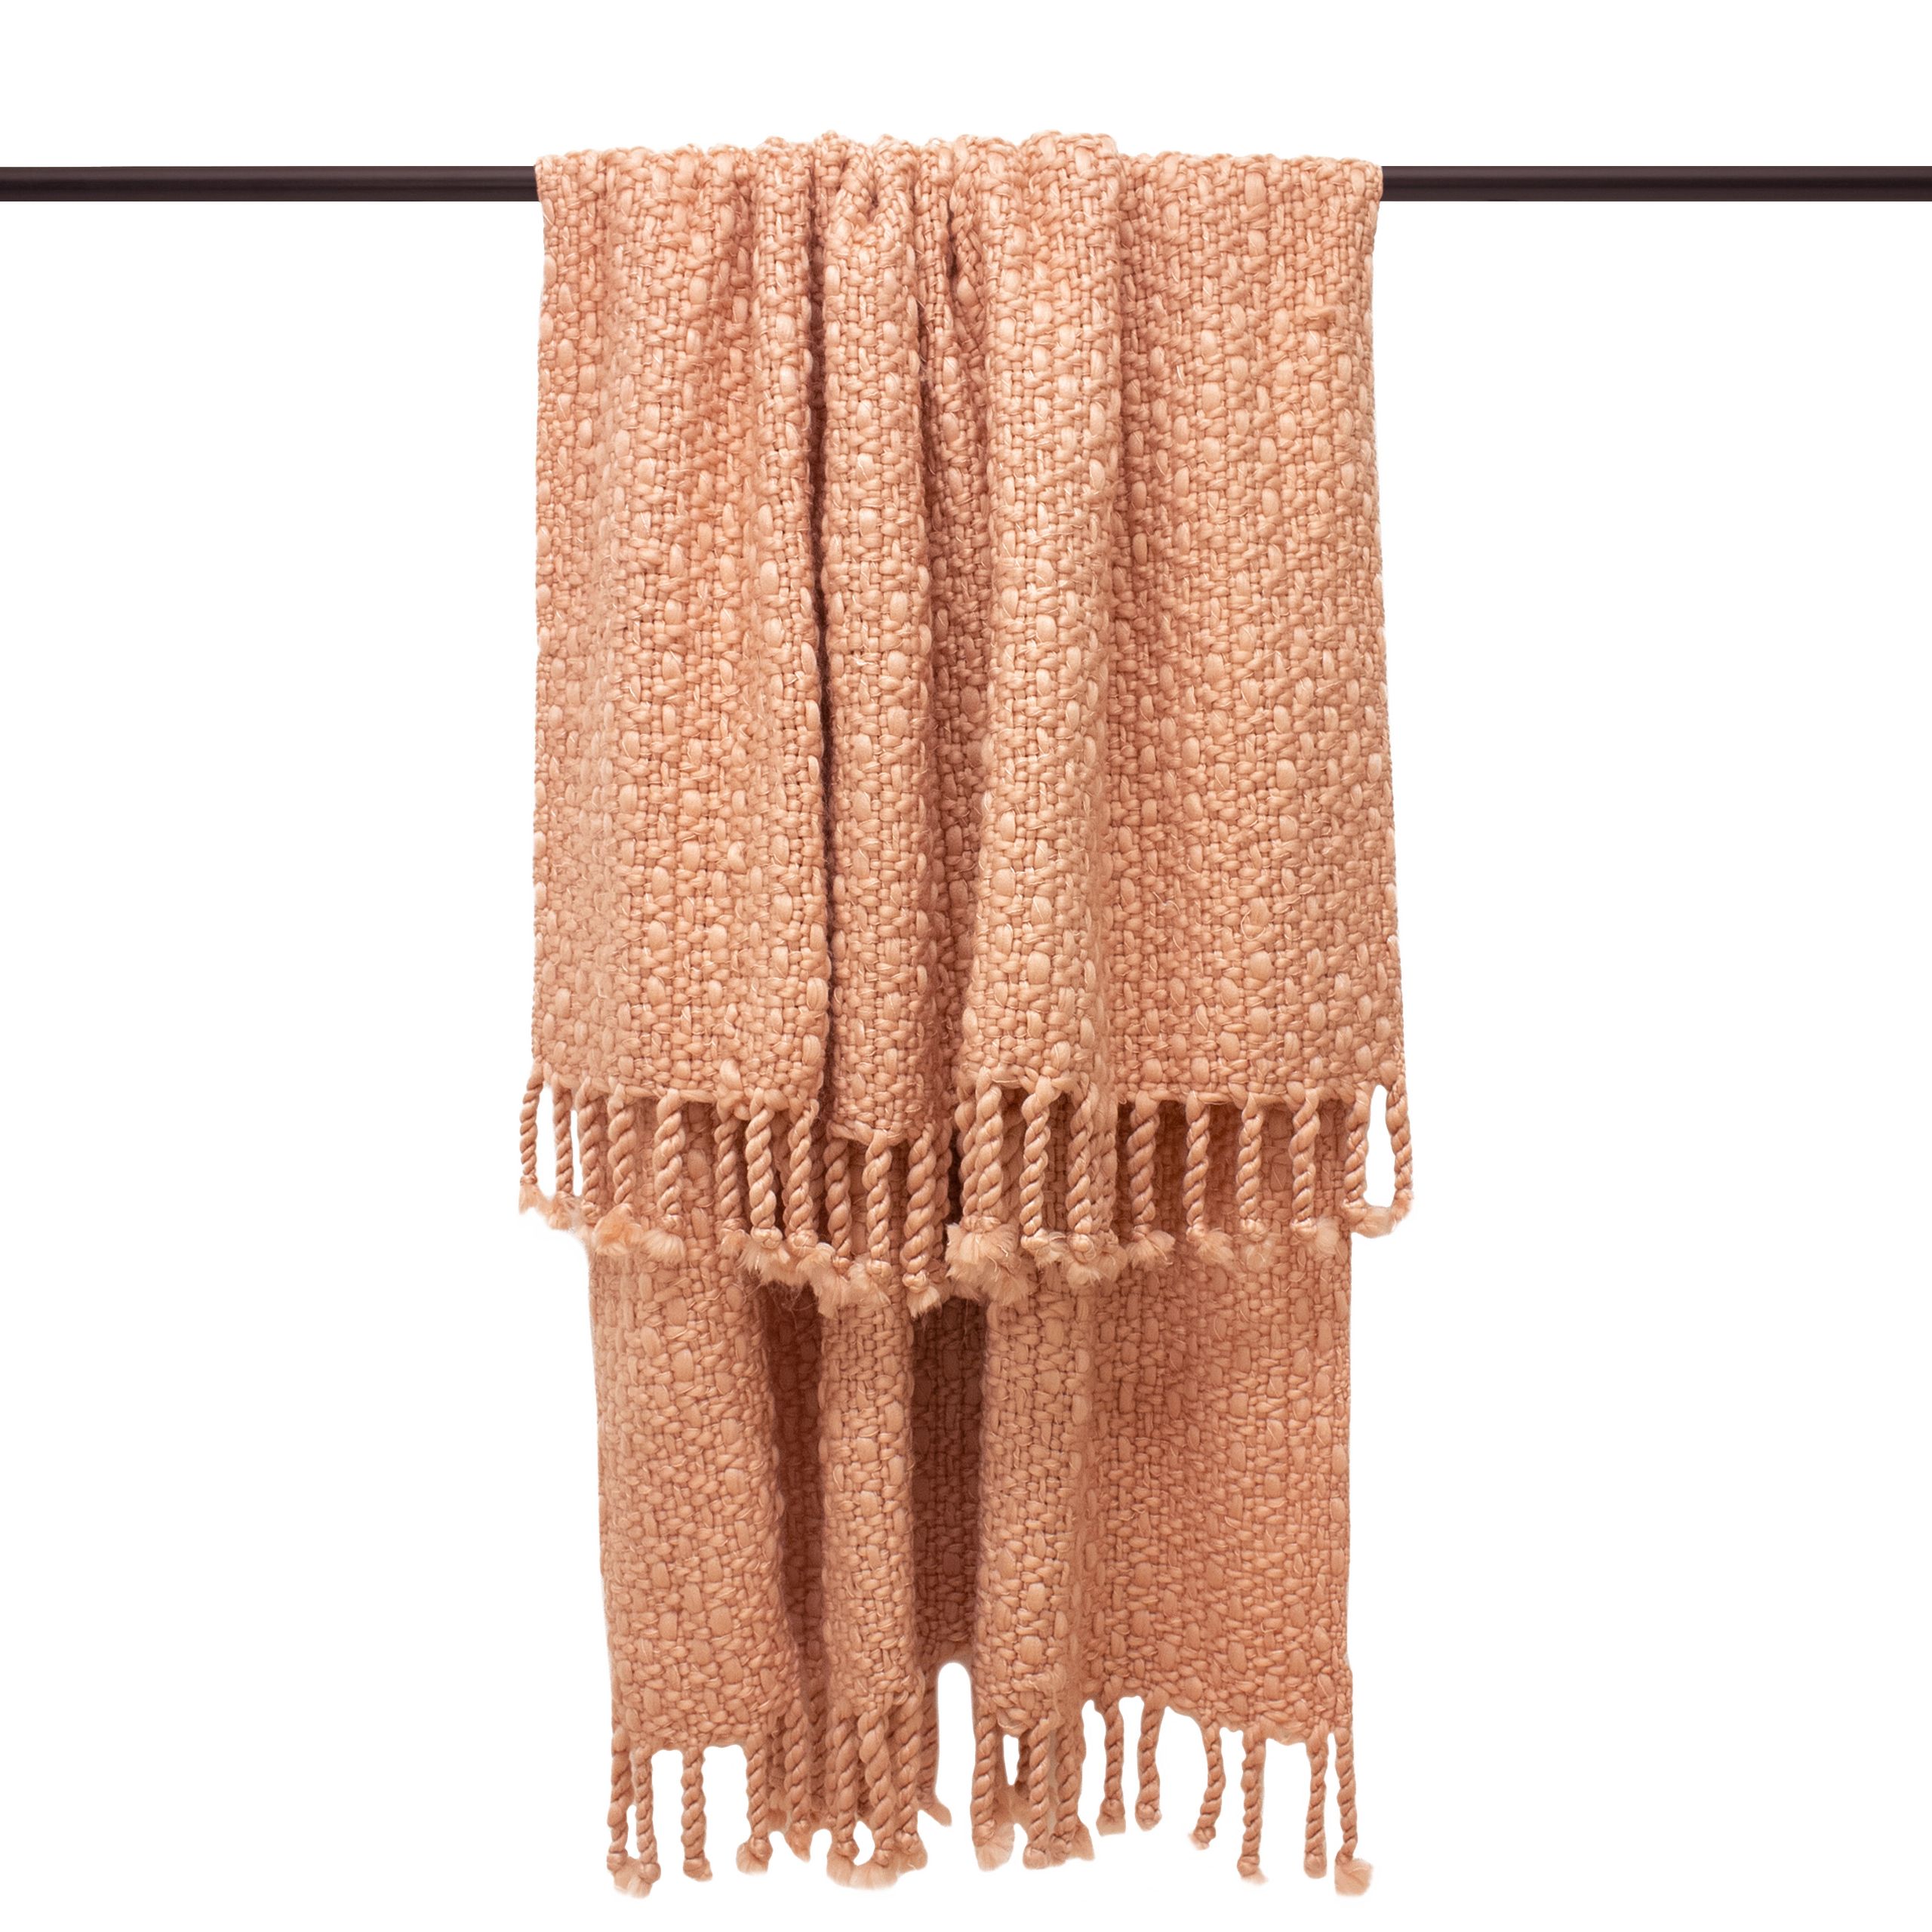 Perfect for those who love a winter warmer, this beautifully soft, chunky knitted throw will instantly have you curling up on the sofa or bed. Finished with large twisted tassels, this design will be stand out from any décor. Once you are wrapped up within its soft textured layers, you’ll struggle to put the throw down.